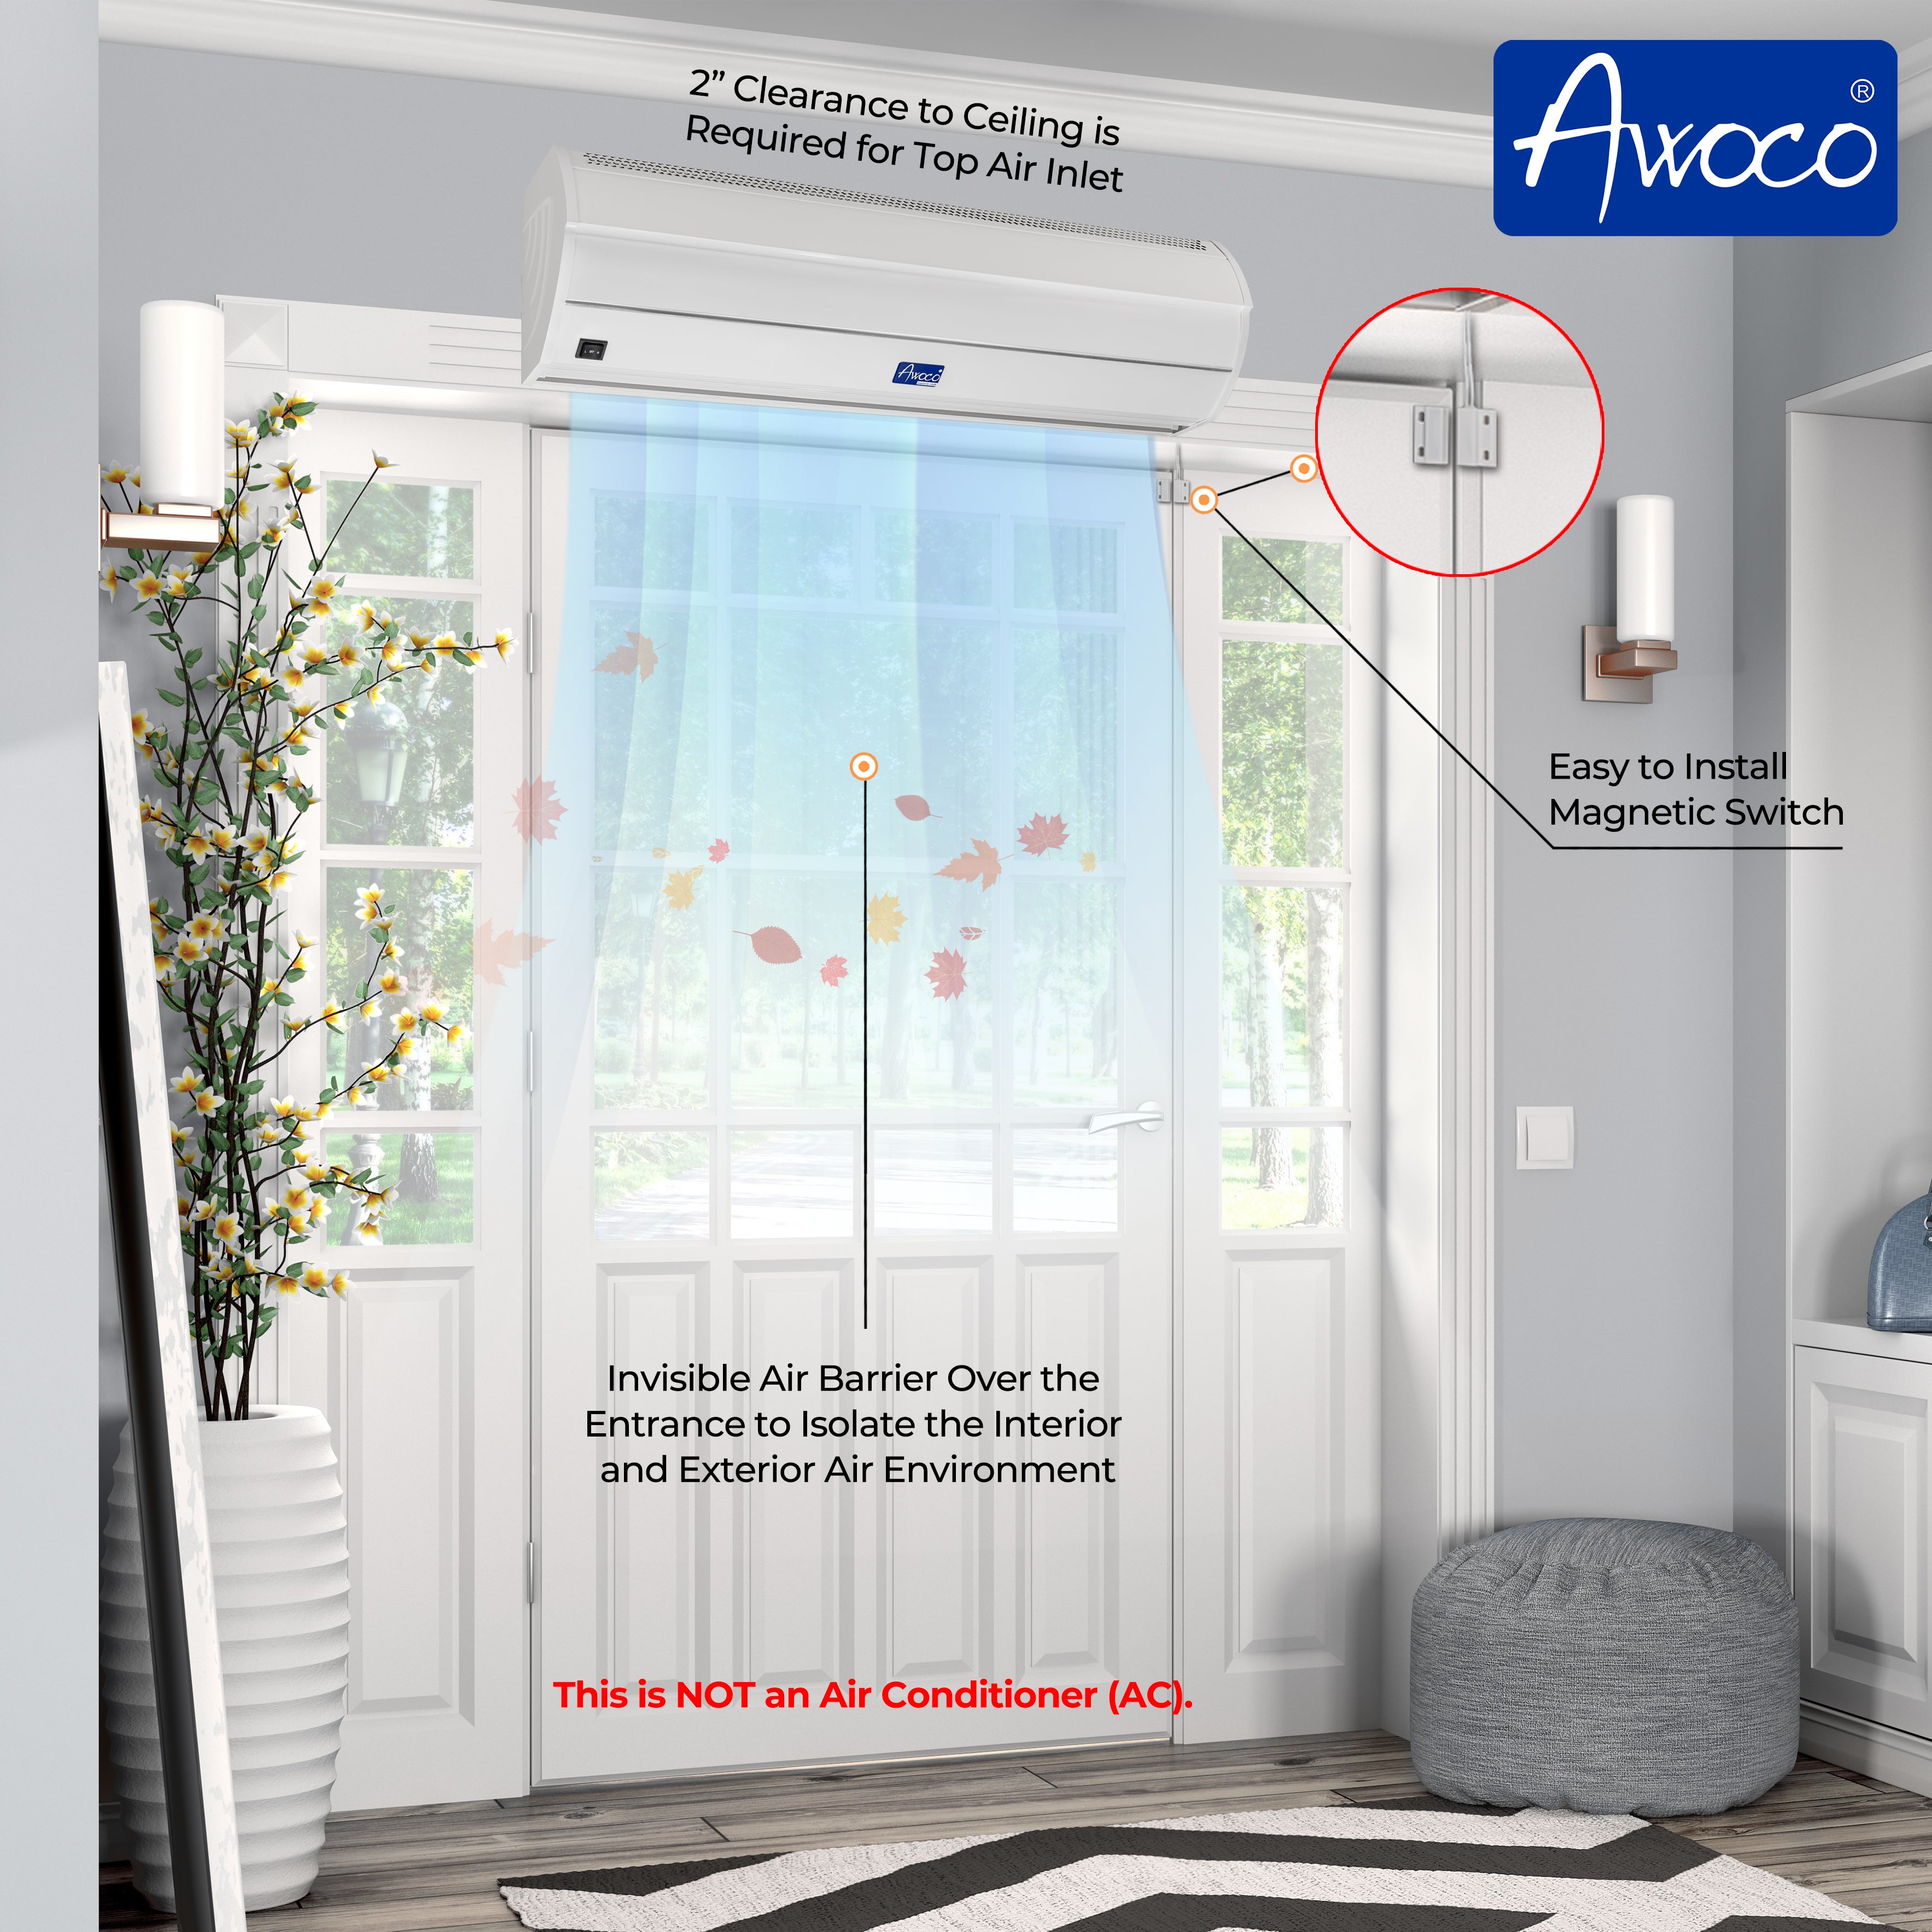 Awoco 42" Elegant 2 Speeds 1000 CFM Air Curtain, UL Certified, 120V Unheated with Magnetic Shutoff Delay Swing Doors